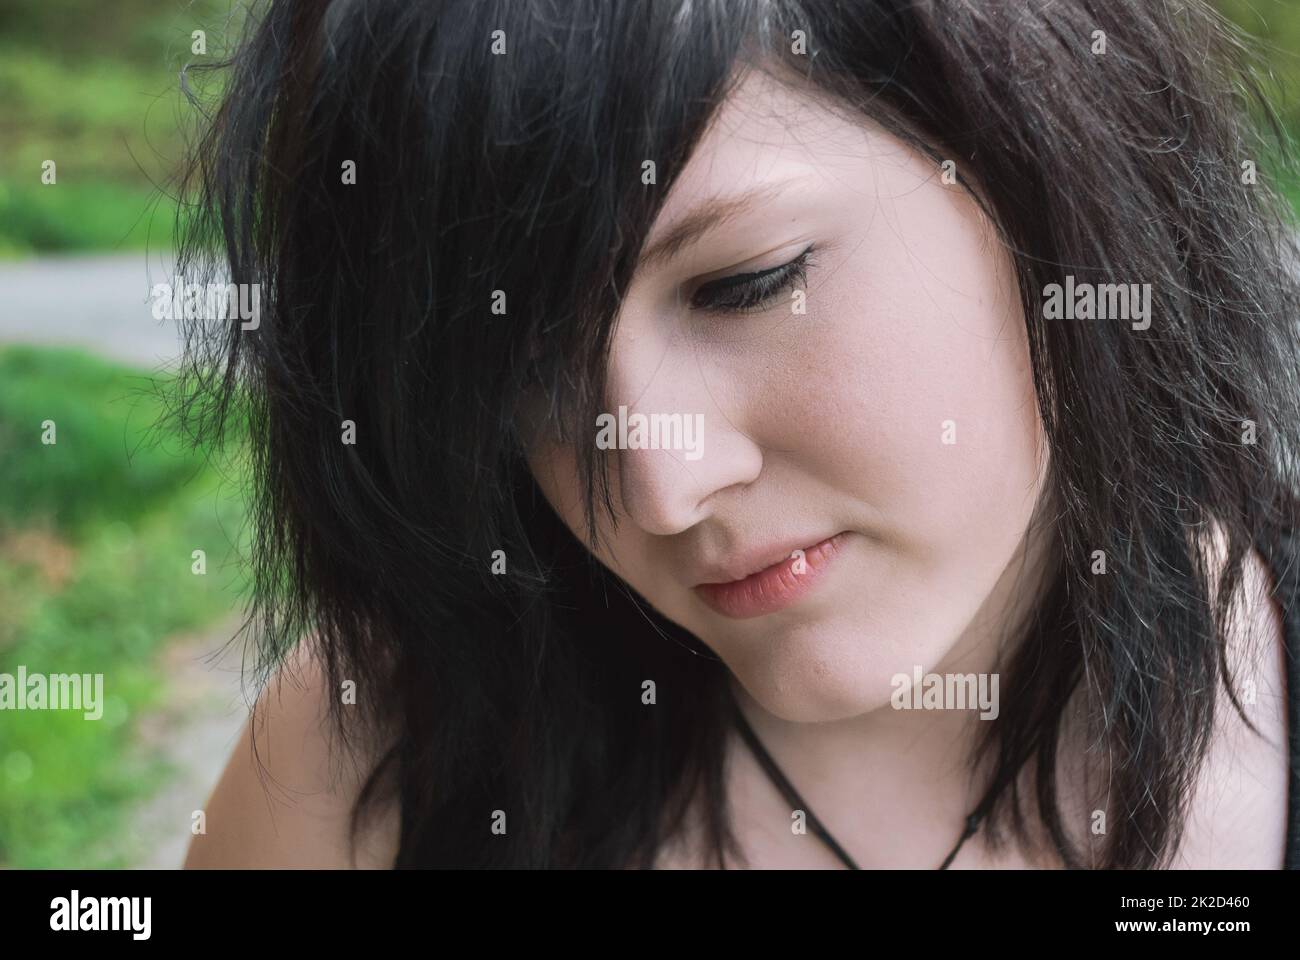 Gothic emo girl looking down, close-up Stock Photo